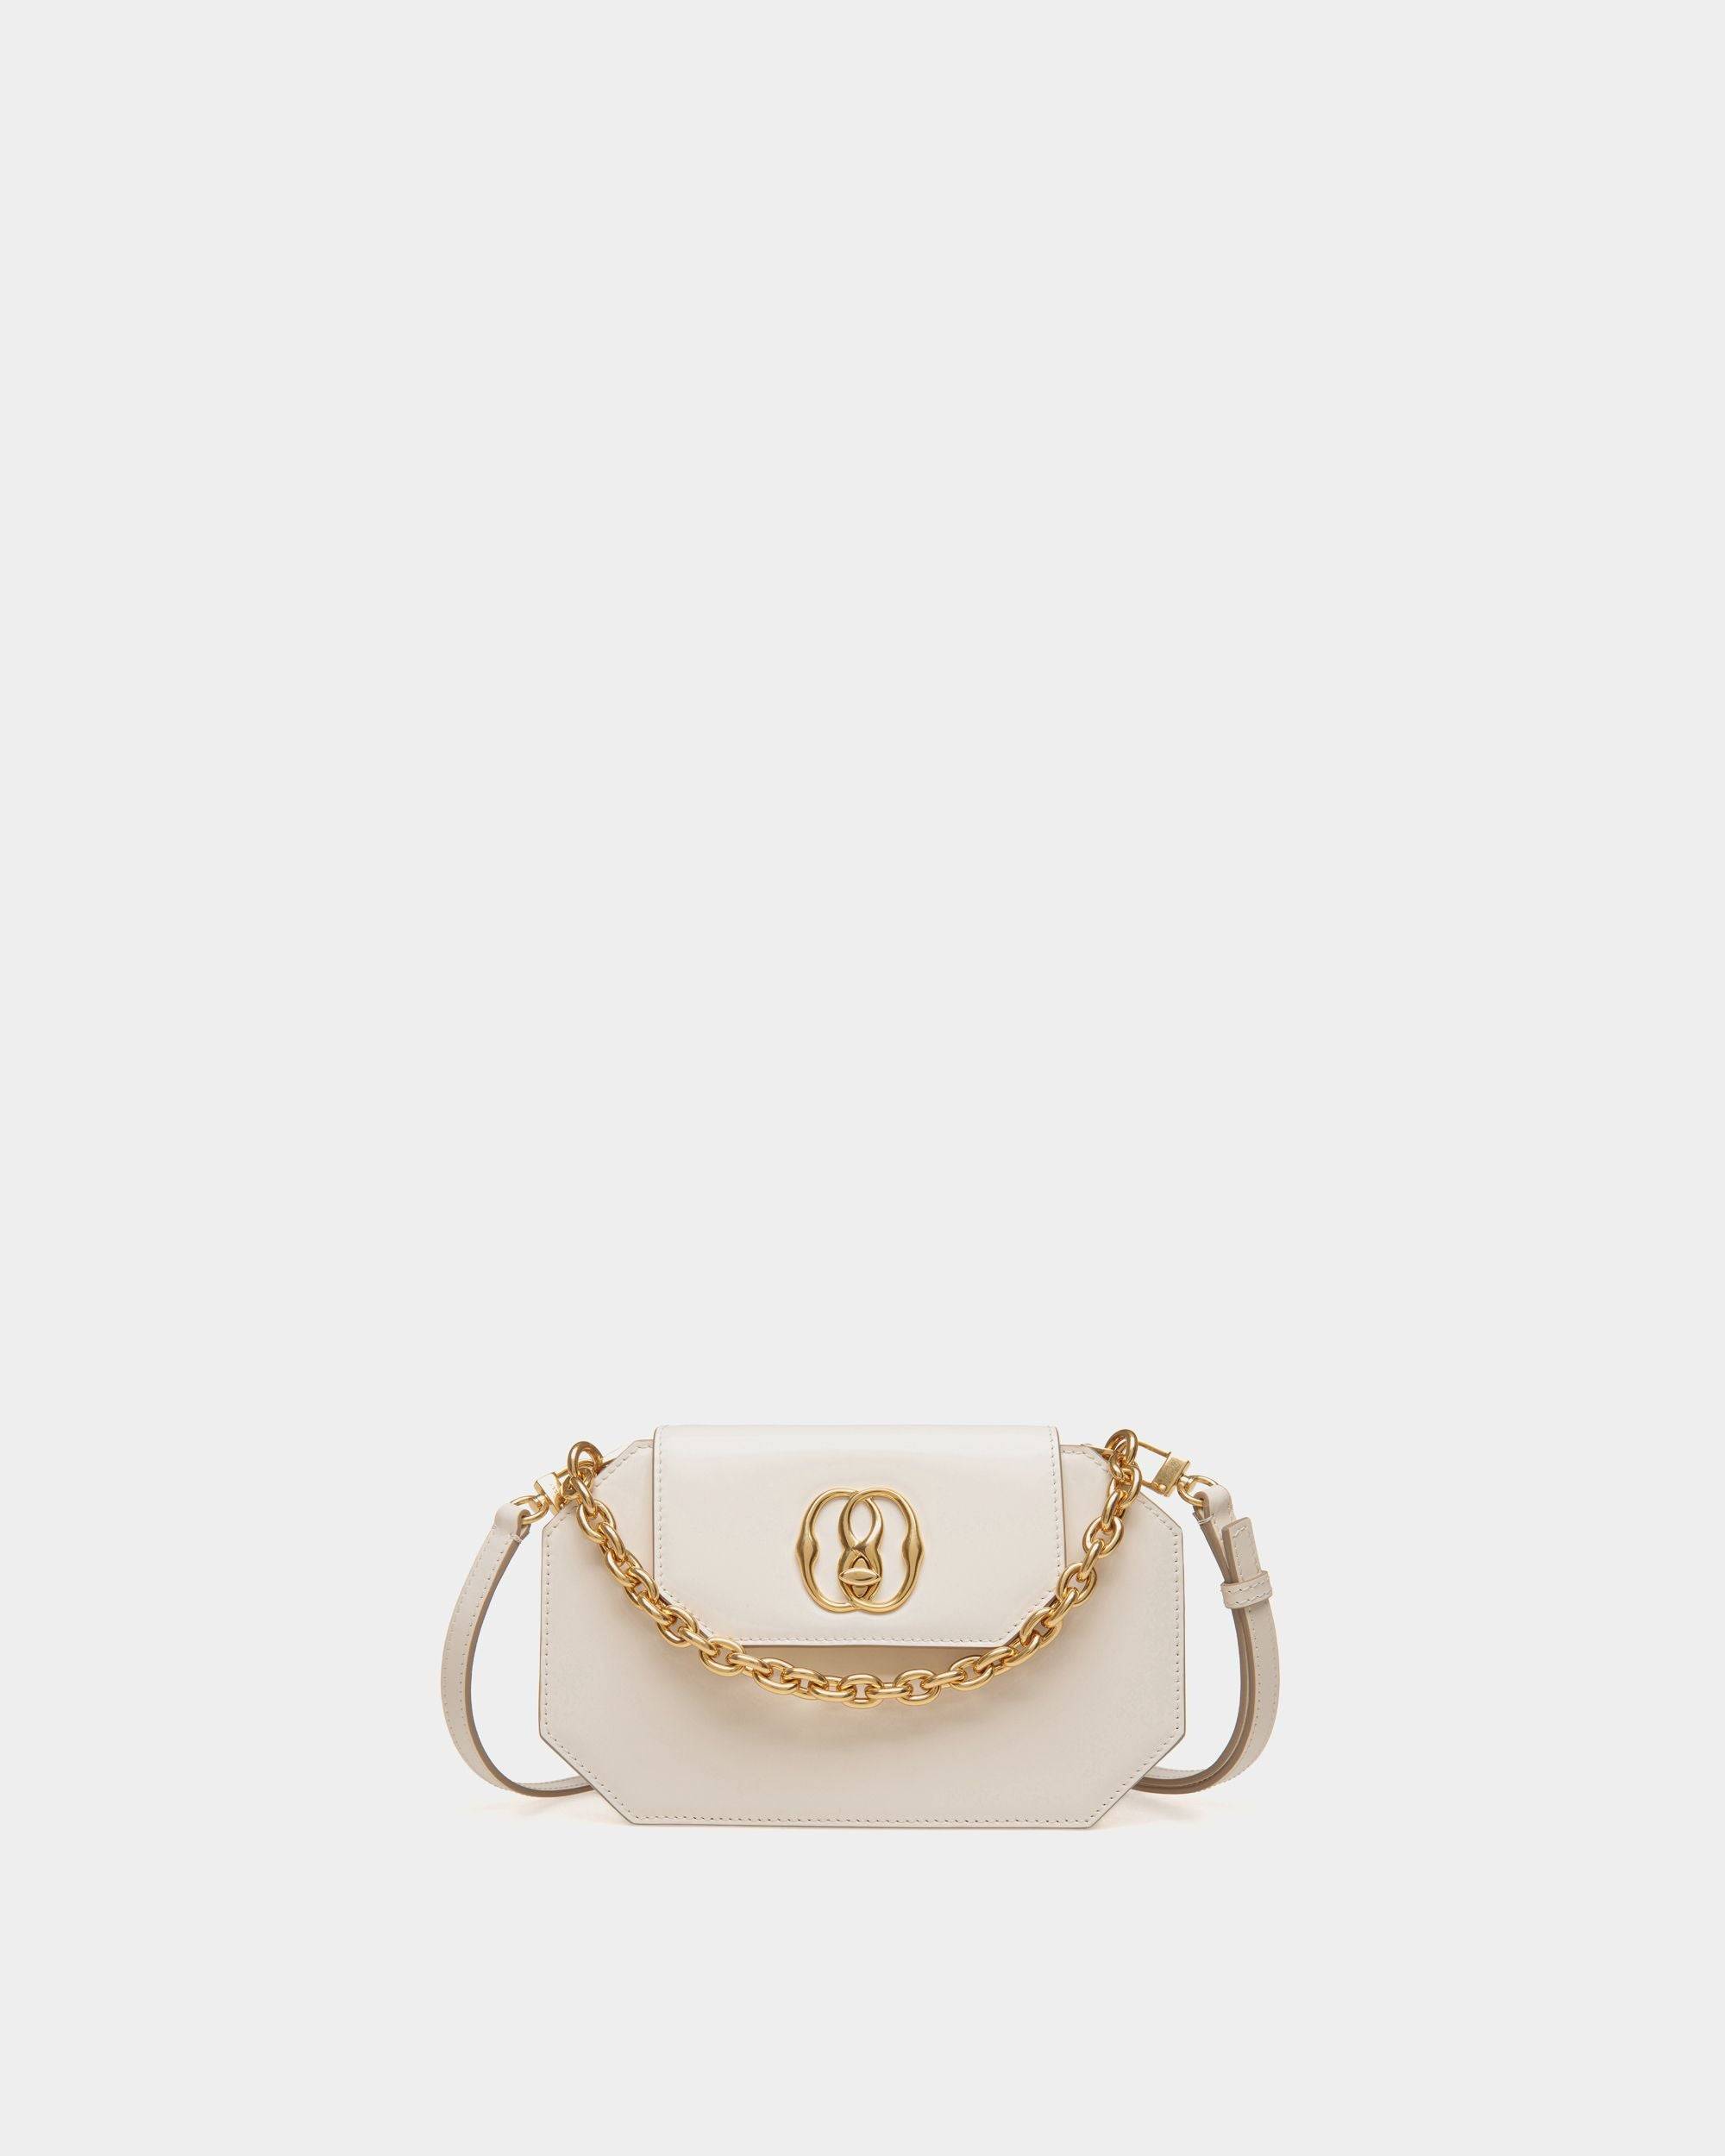 Emblem | Women's Mini Bag in White Brushed Leather | Bally | Still Life Front